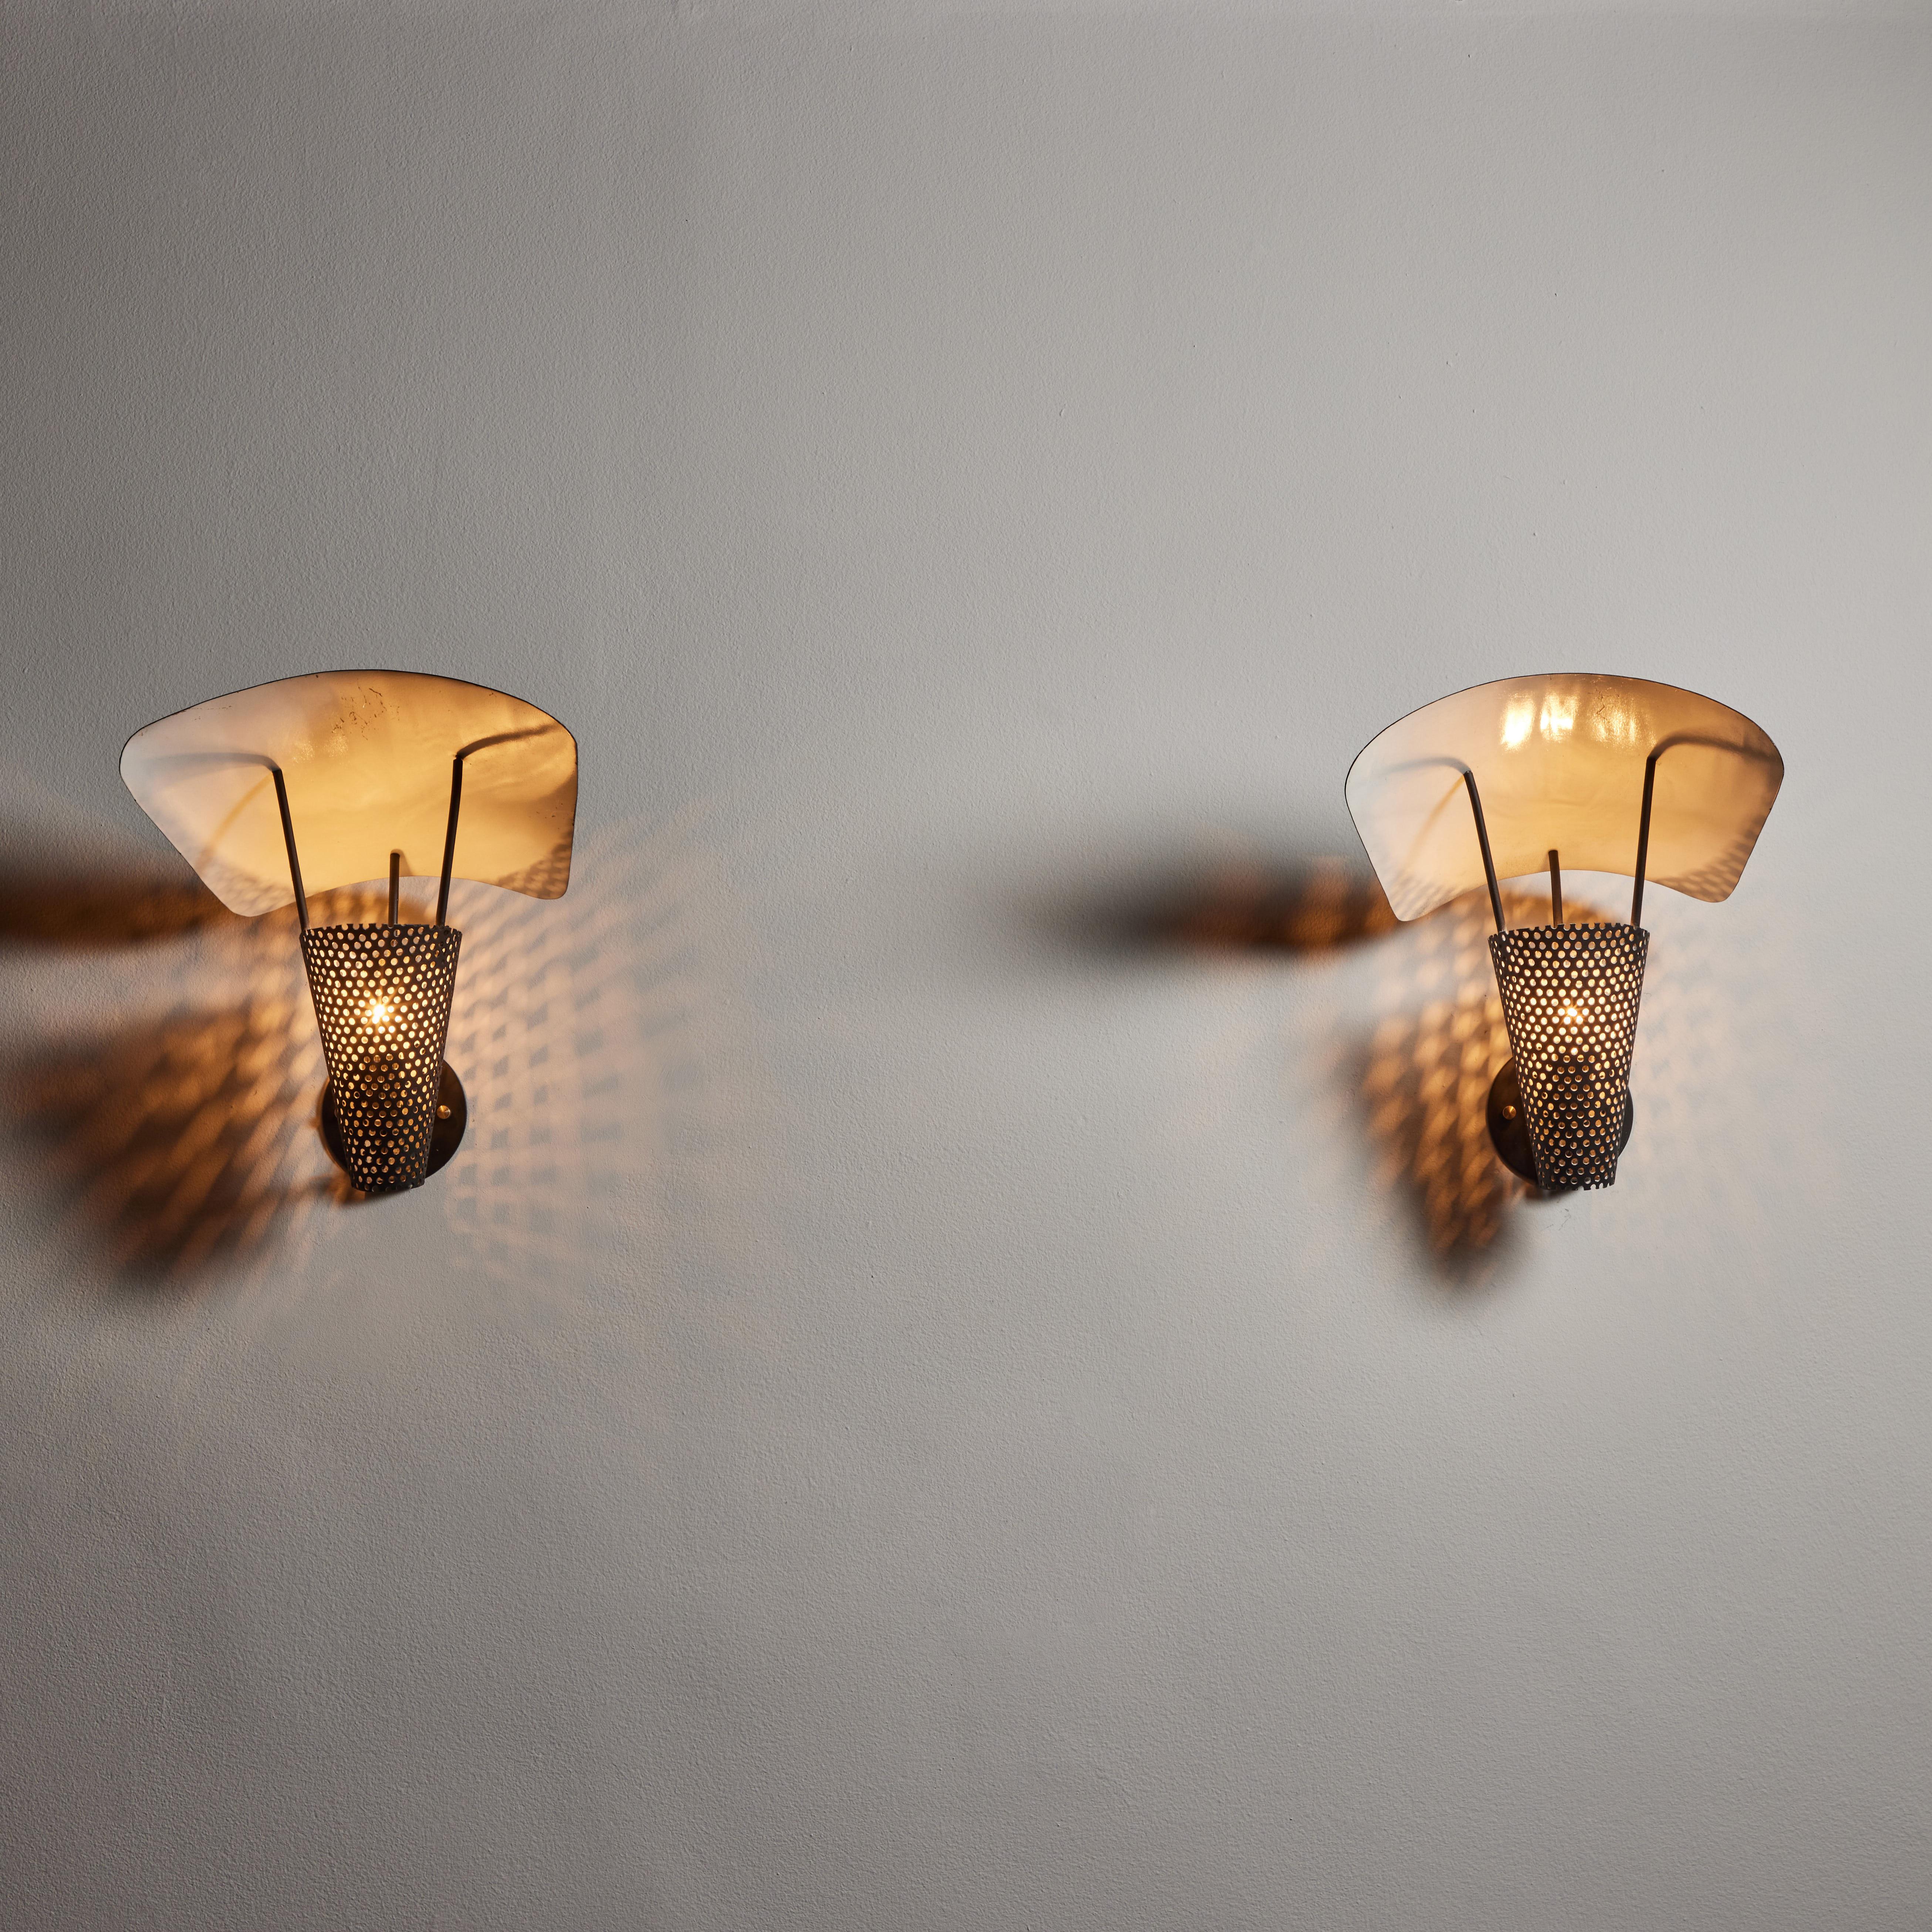 Pair of sconces by Jacques Biny. Designed and manufactured in France, circa 1950's. Enameled metal, custom backplates. Wired for U.S. standards. We recommend on E12 100w maximum American candelabra bulb. Bulbs not included.